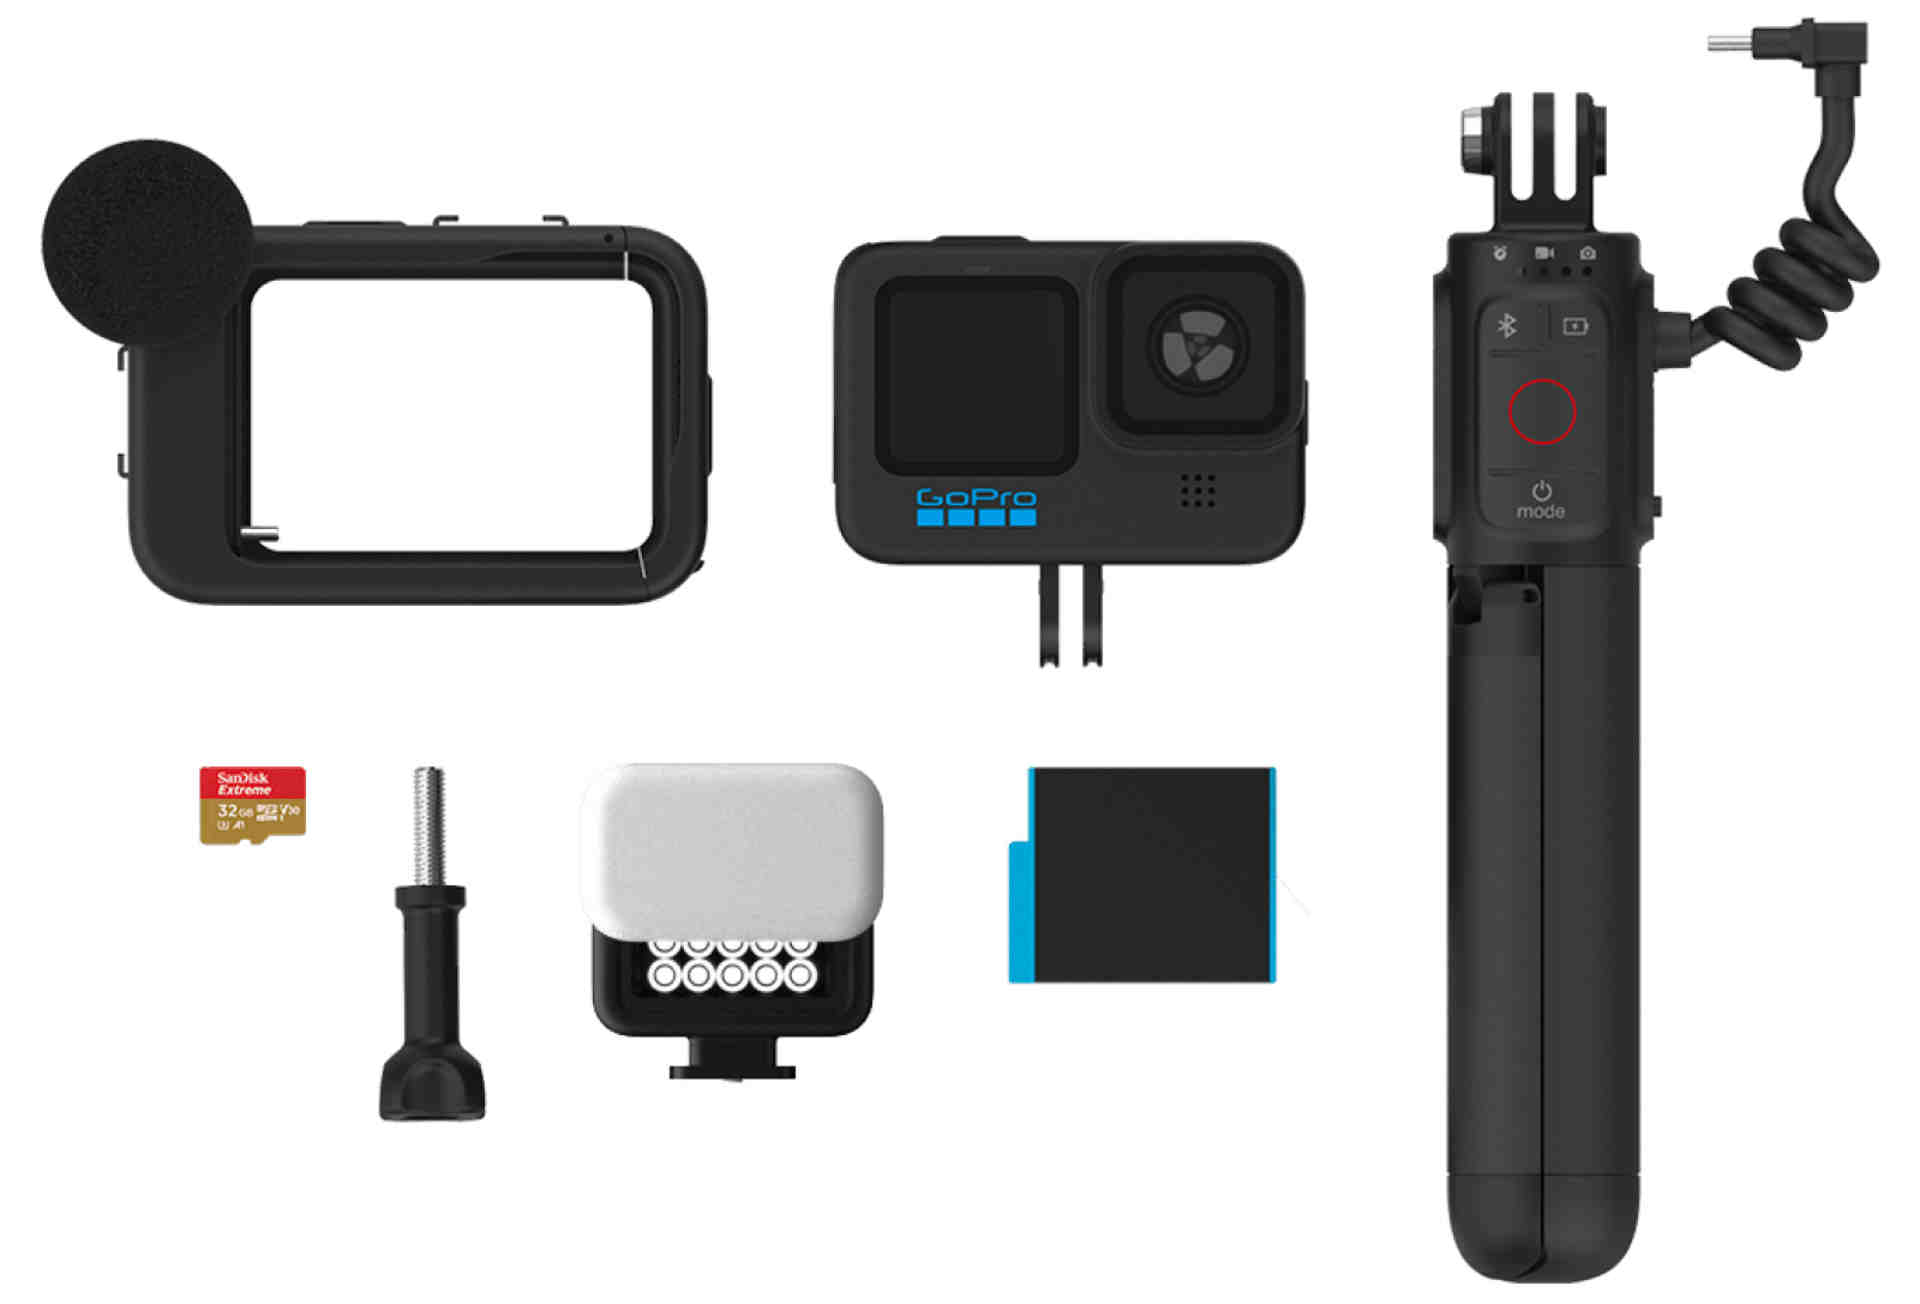 Are GoPro Max waterproof?